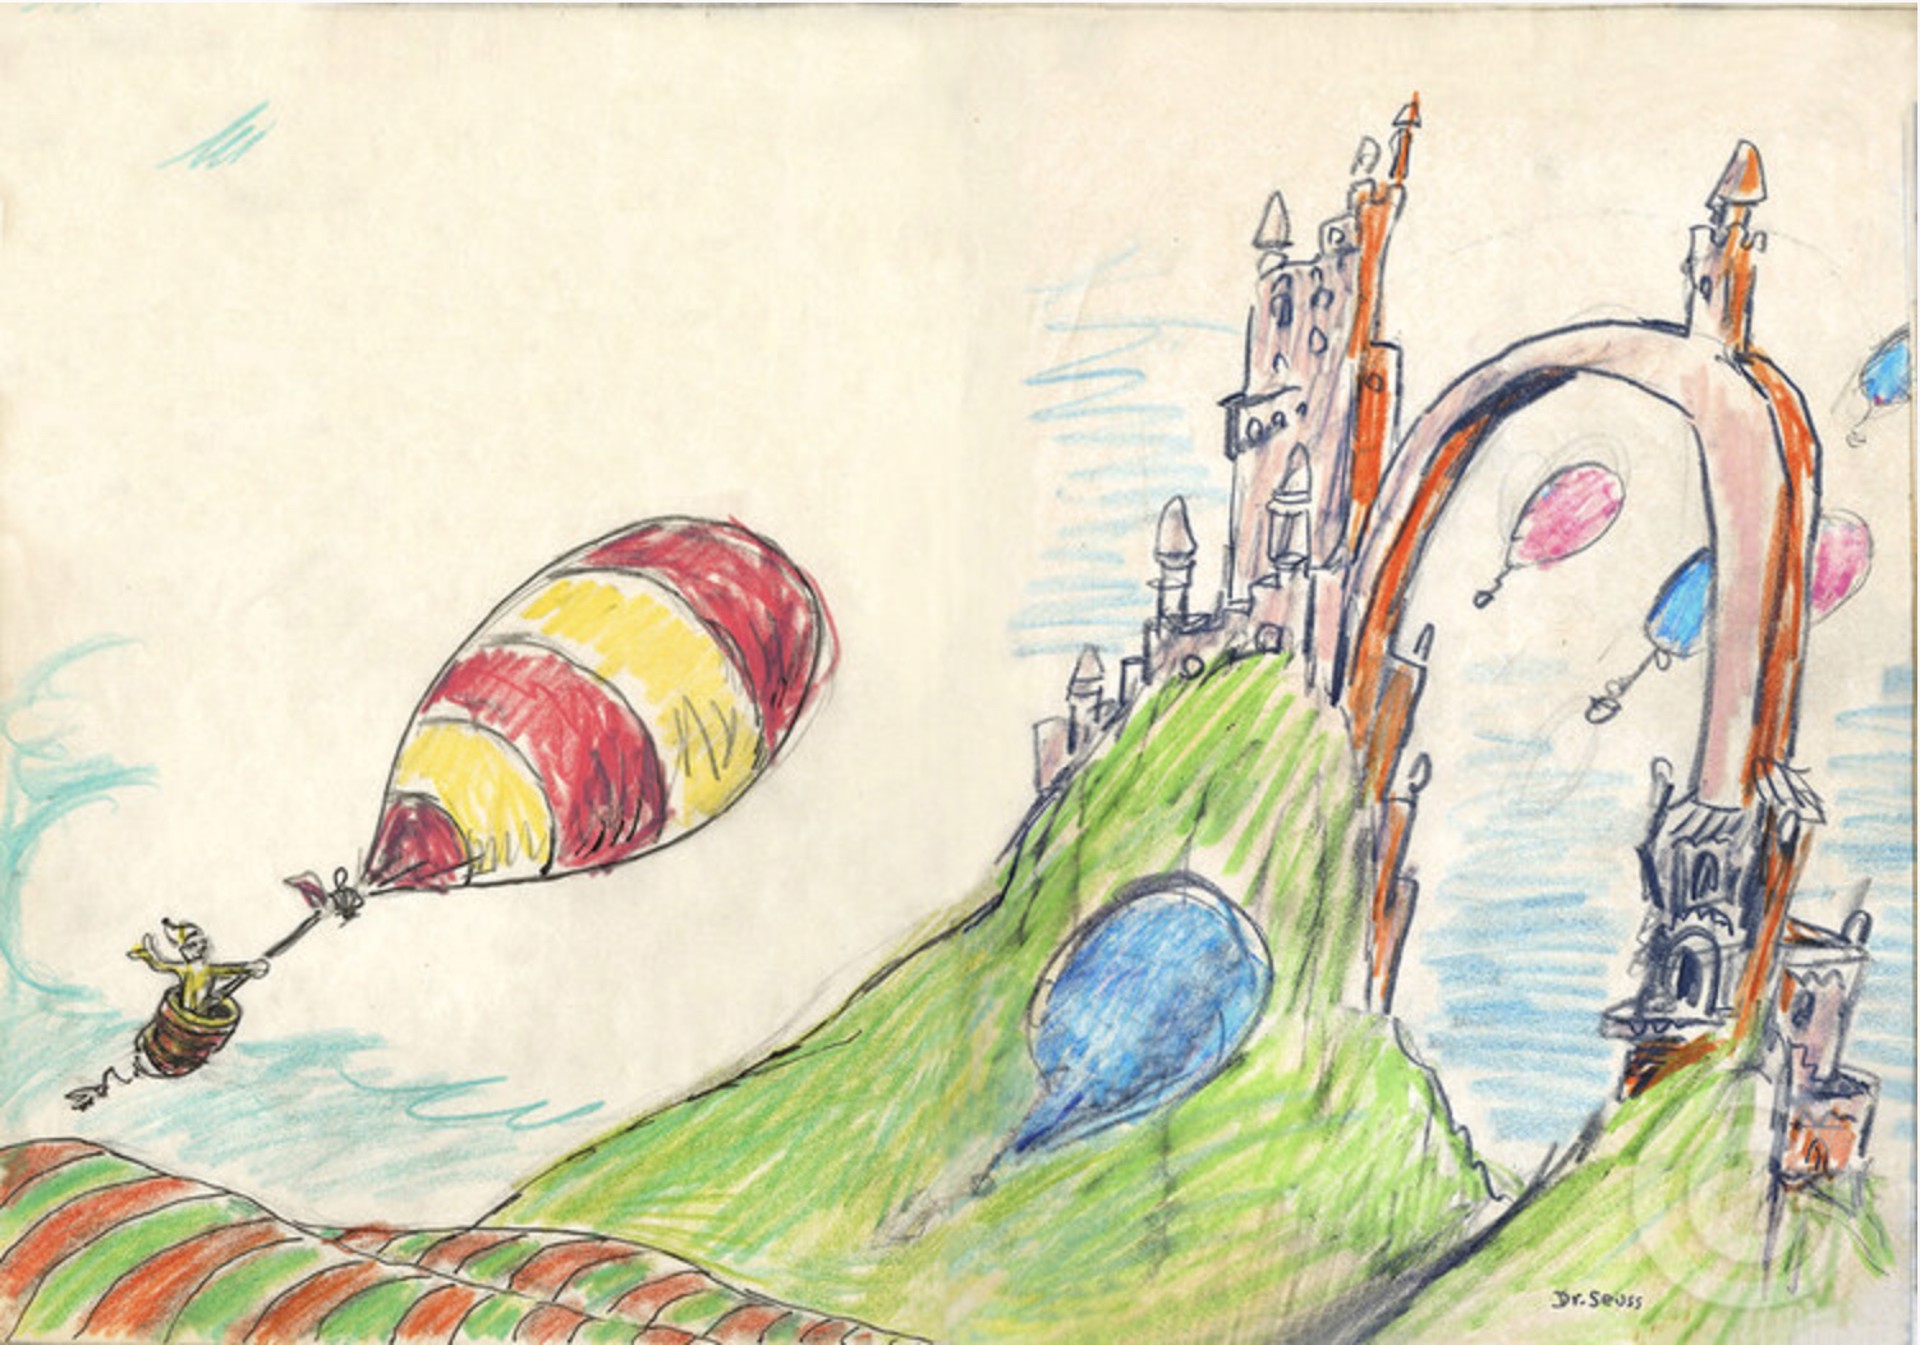 Soar to high heights - unframed by Dr. Seuss